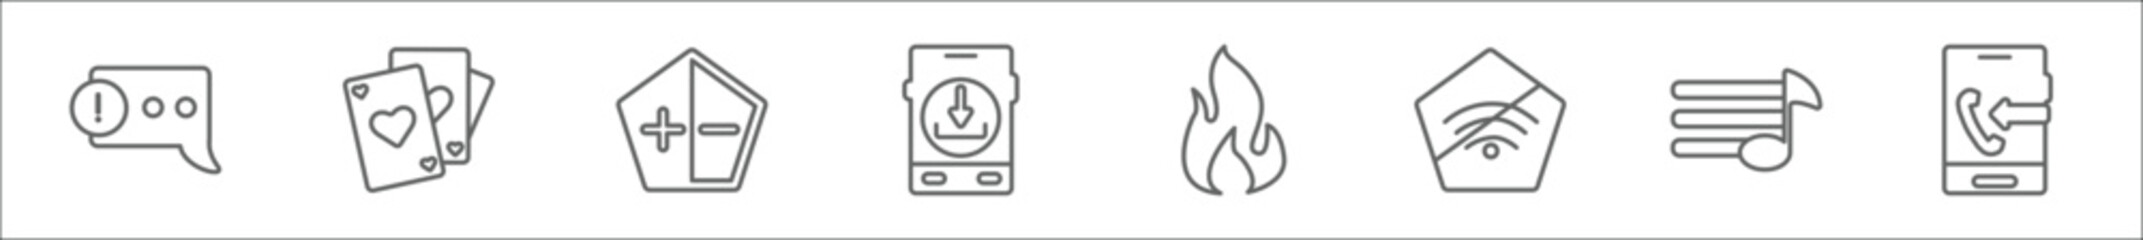 outline set of ultimate glyphicons line icons. linear vector icons such as error message, three cards, darker or brightter button, smartphone and download arrow, round flame, internet connections